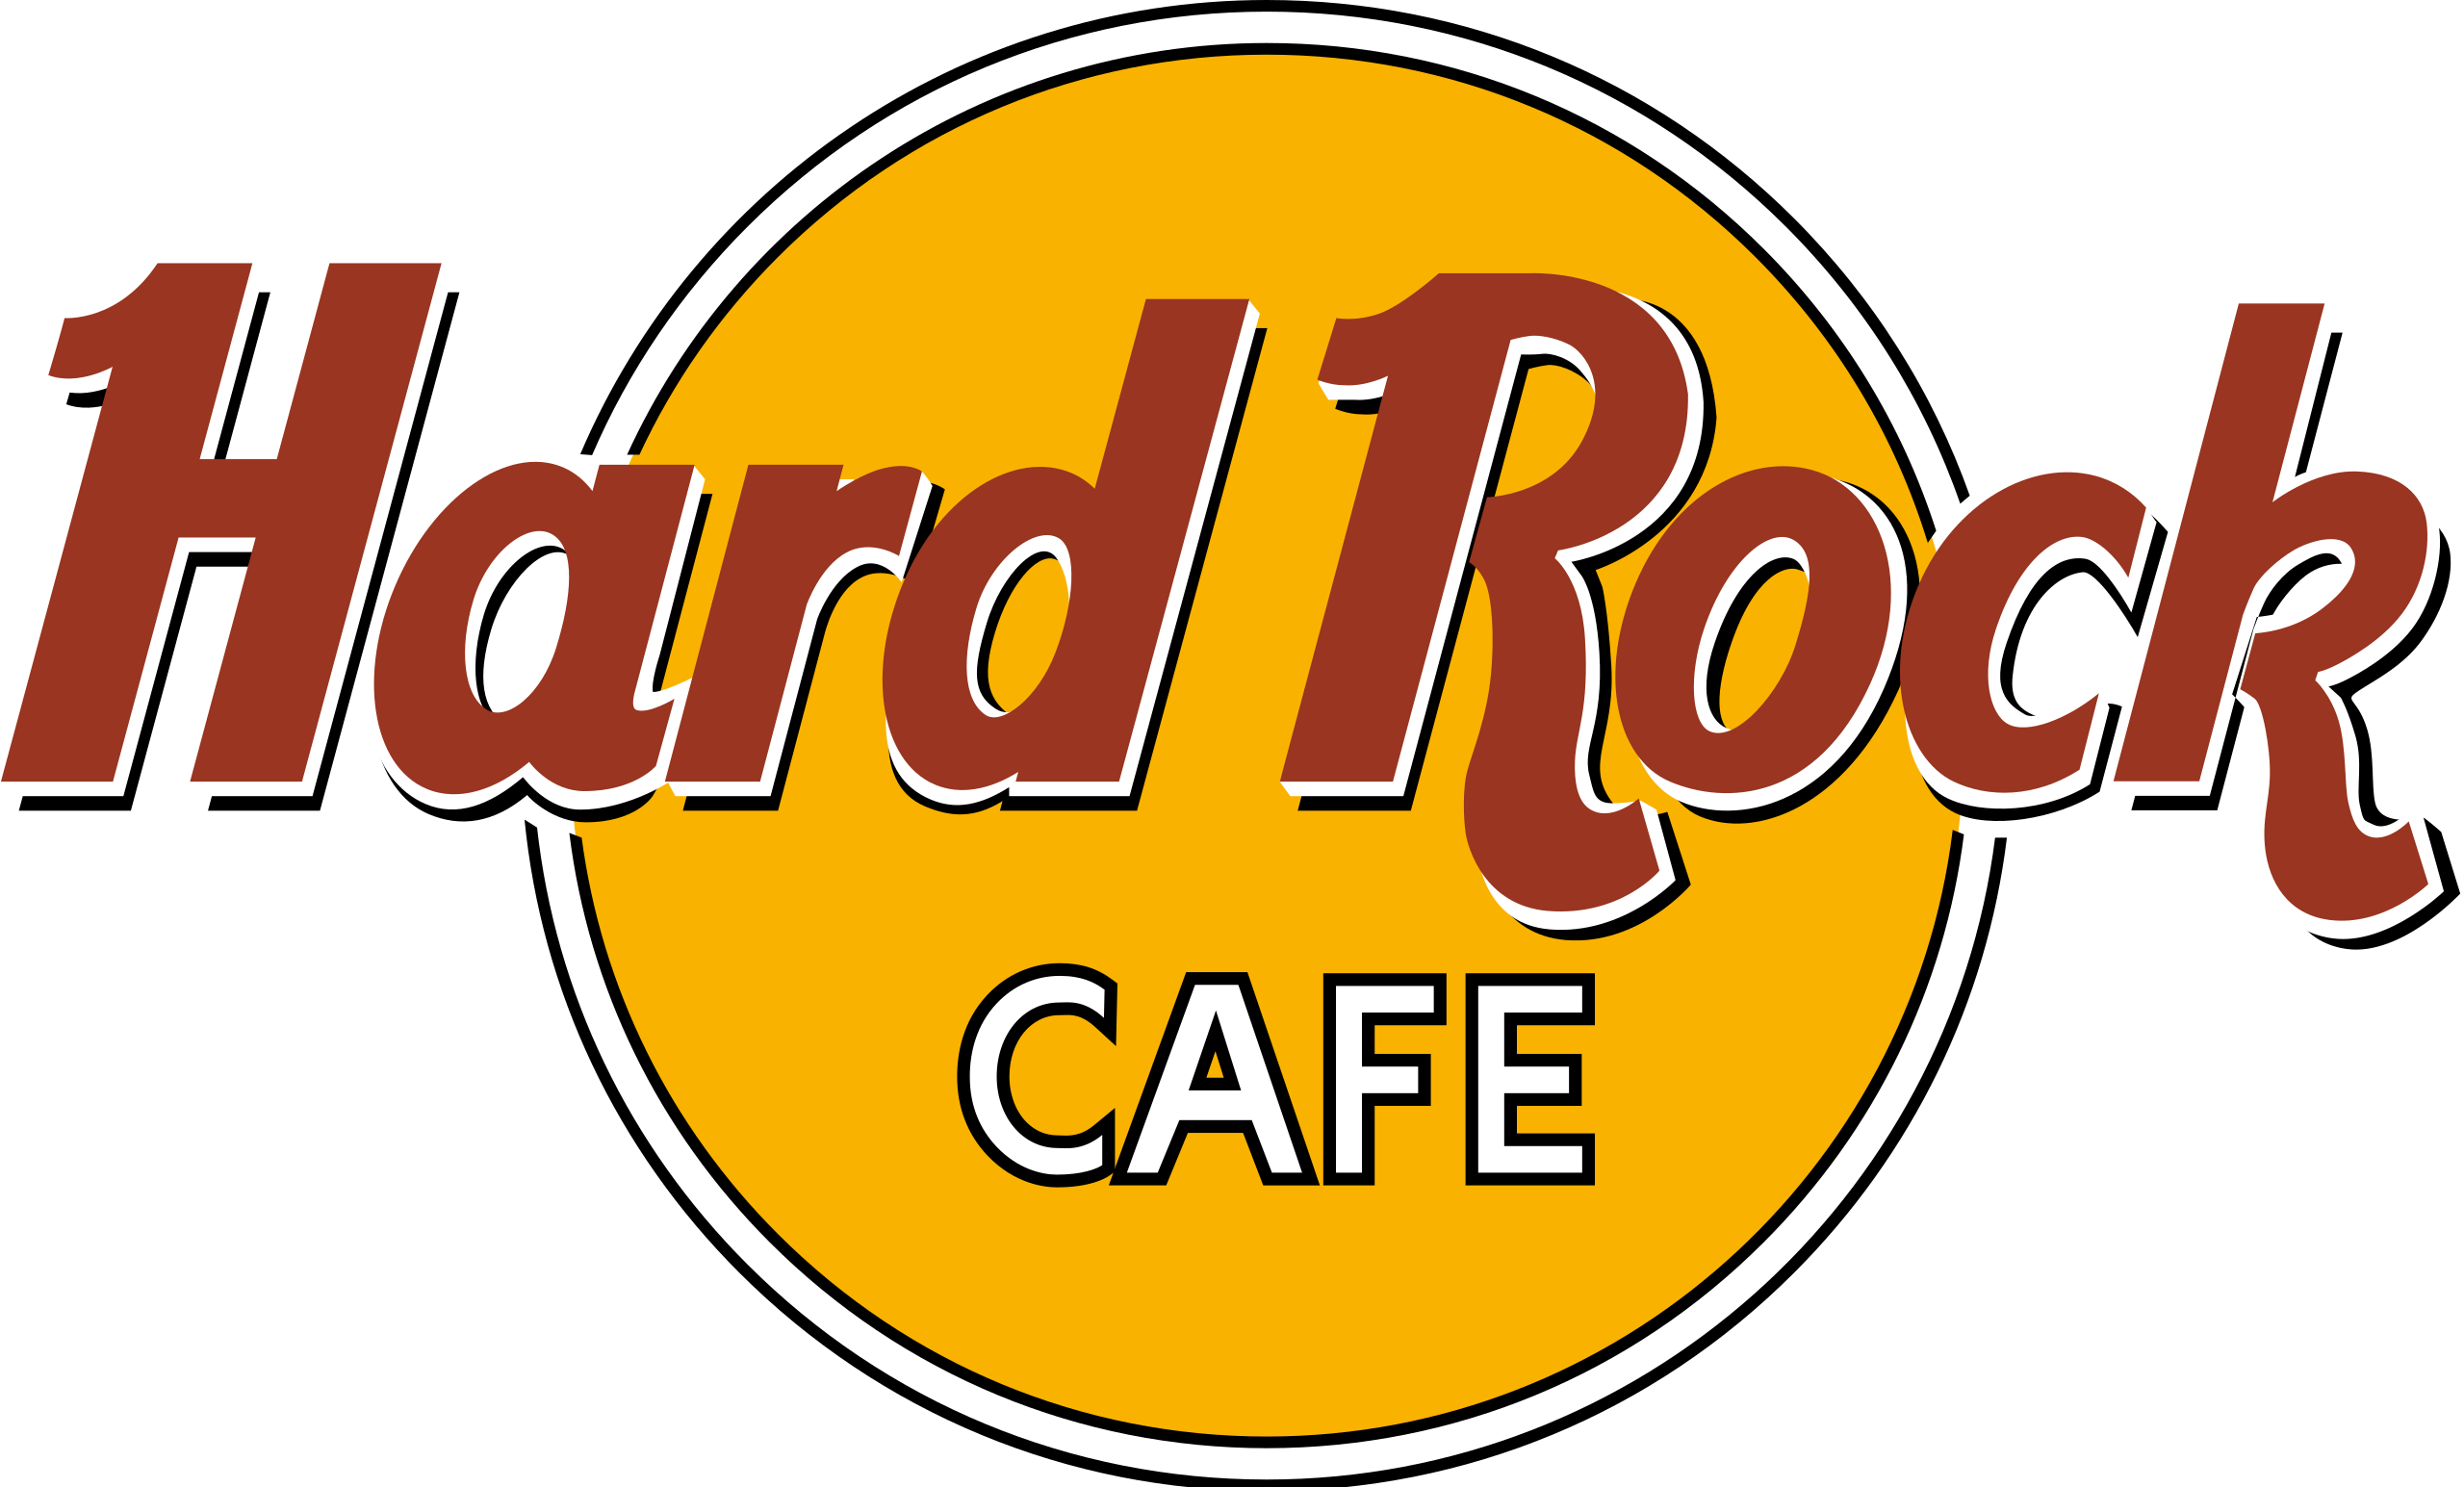 is hard rock cafe halal in the United States?